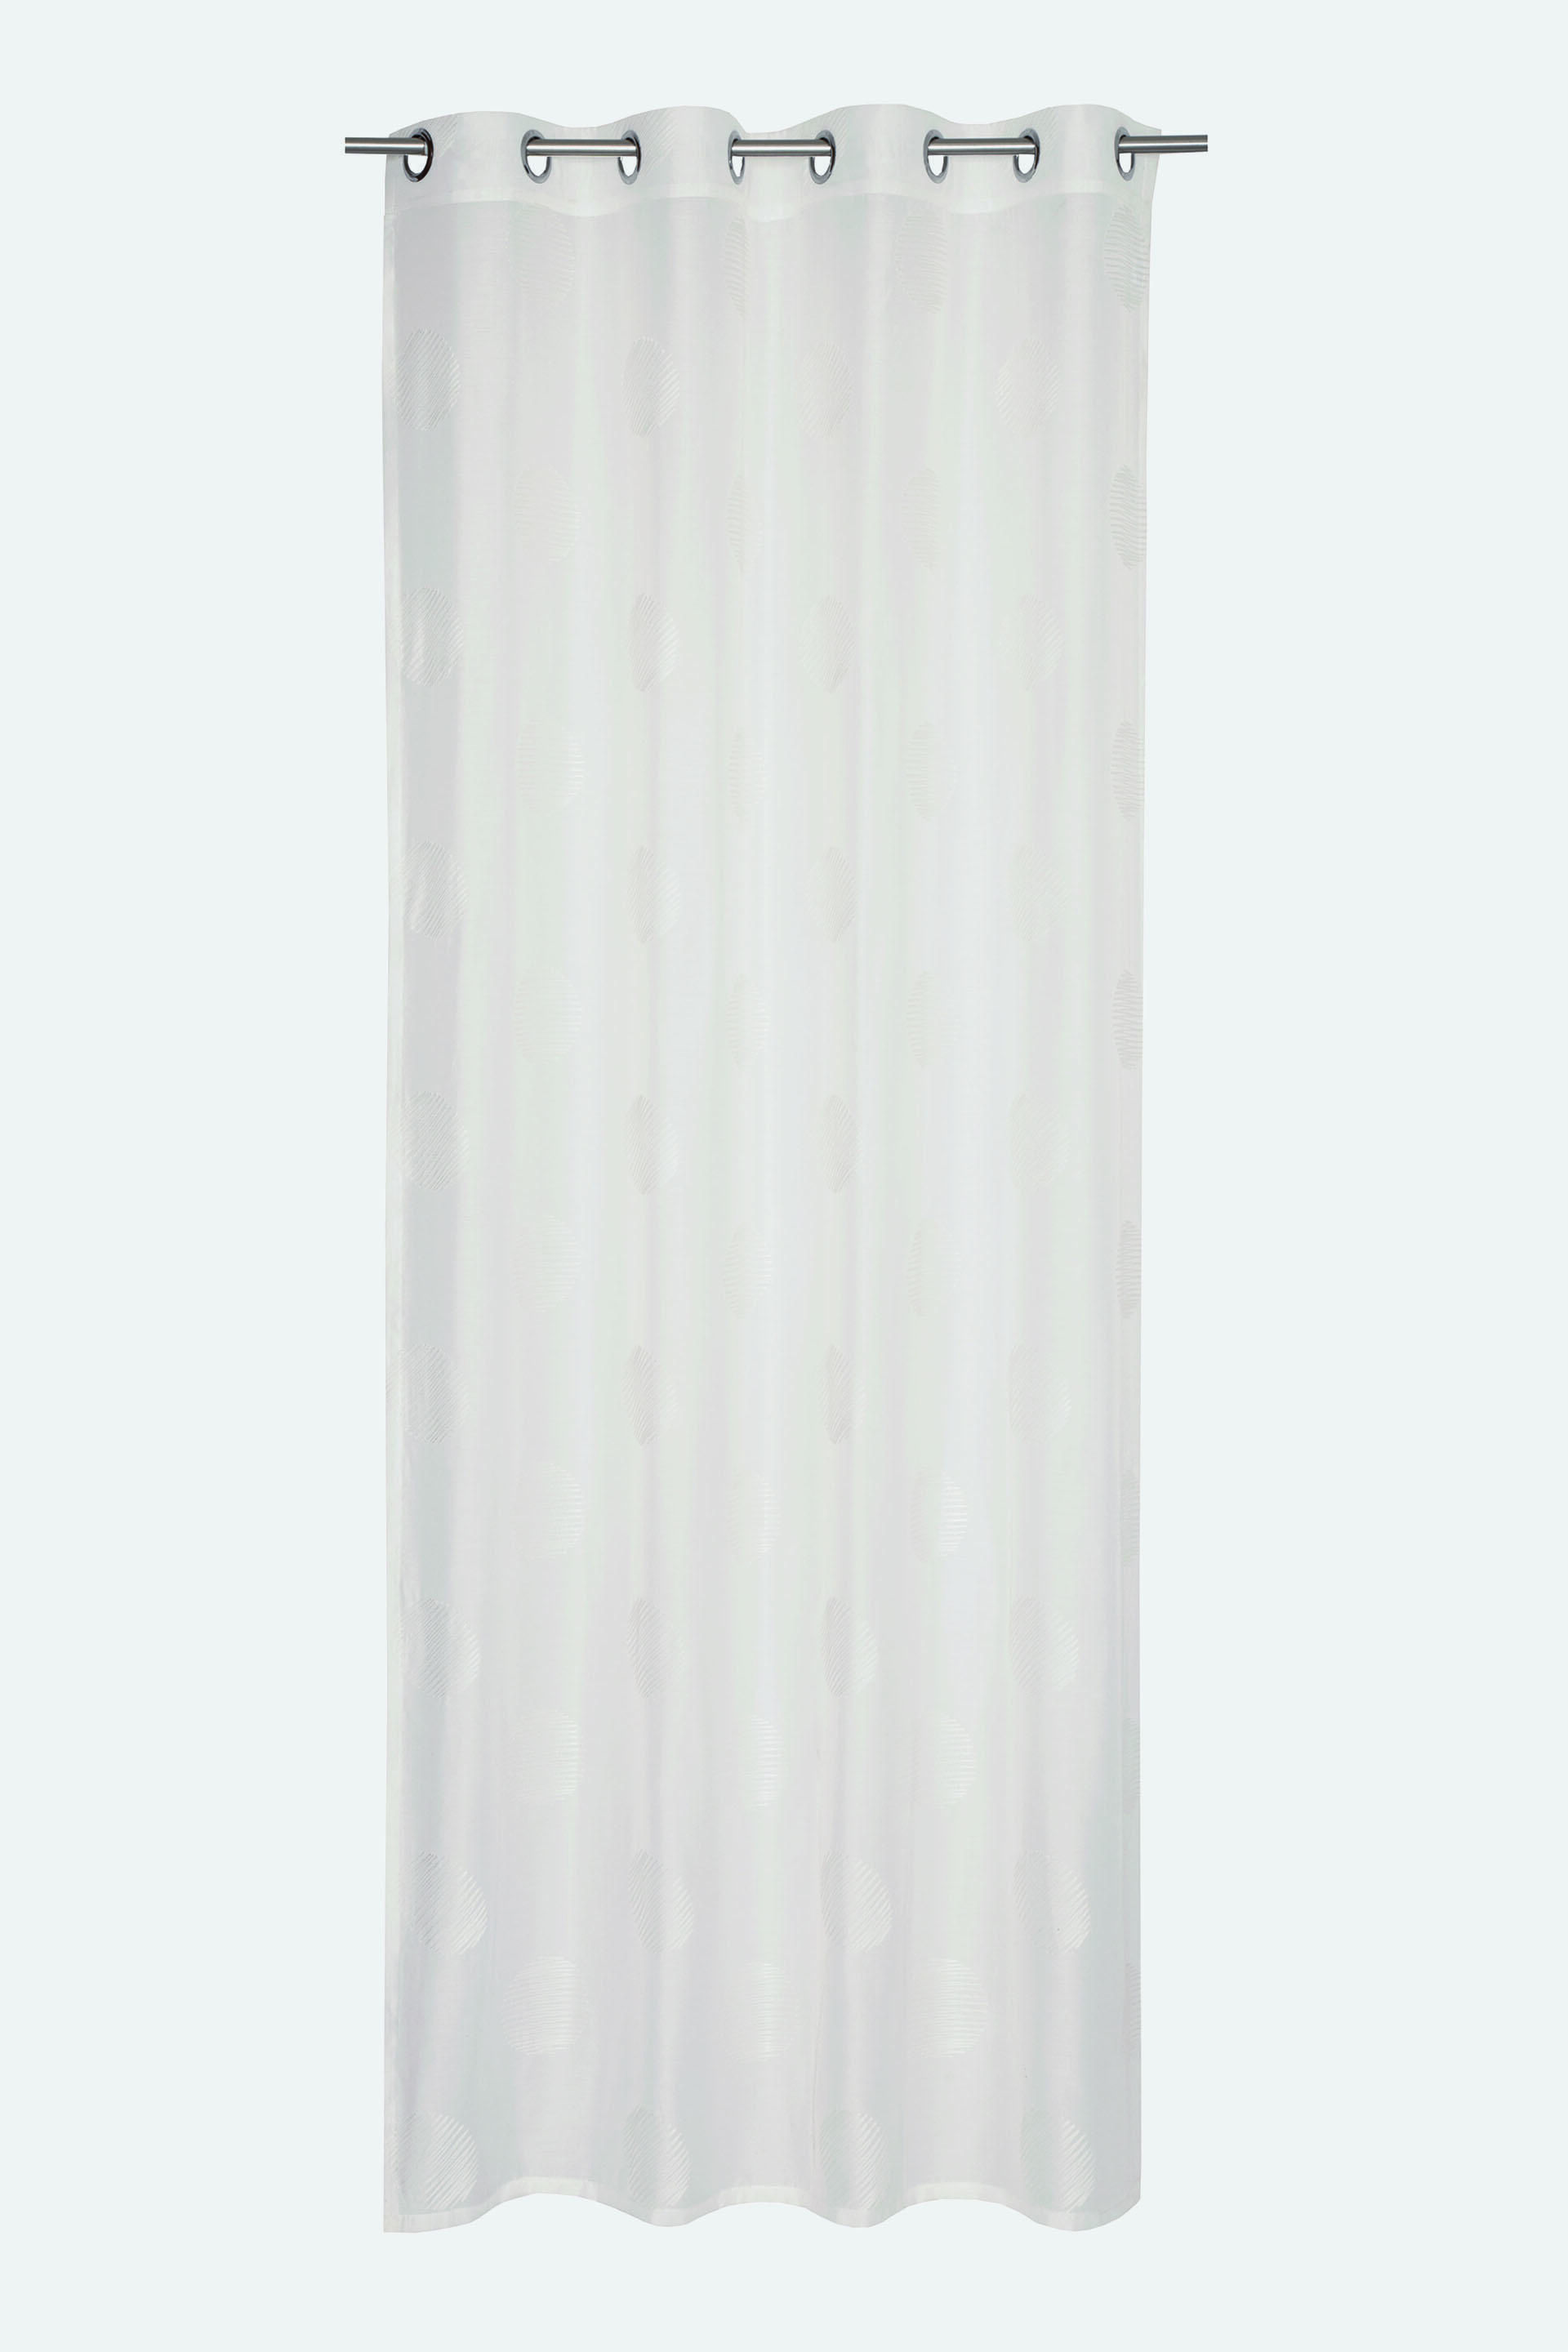 Esprit Sheer embroidery eyelet with curtain